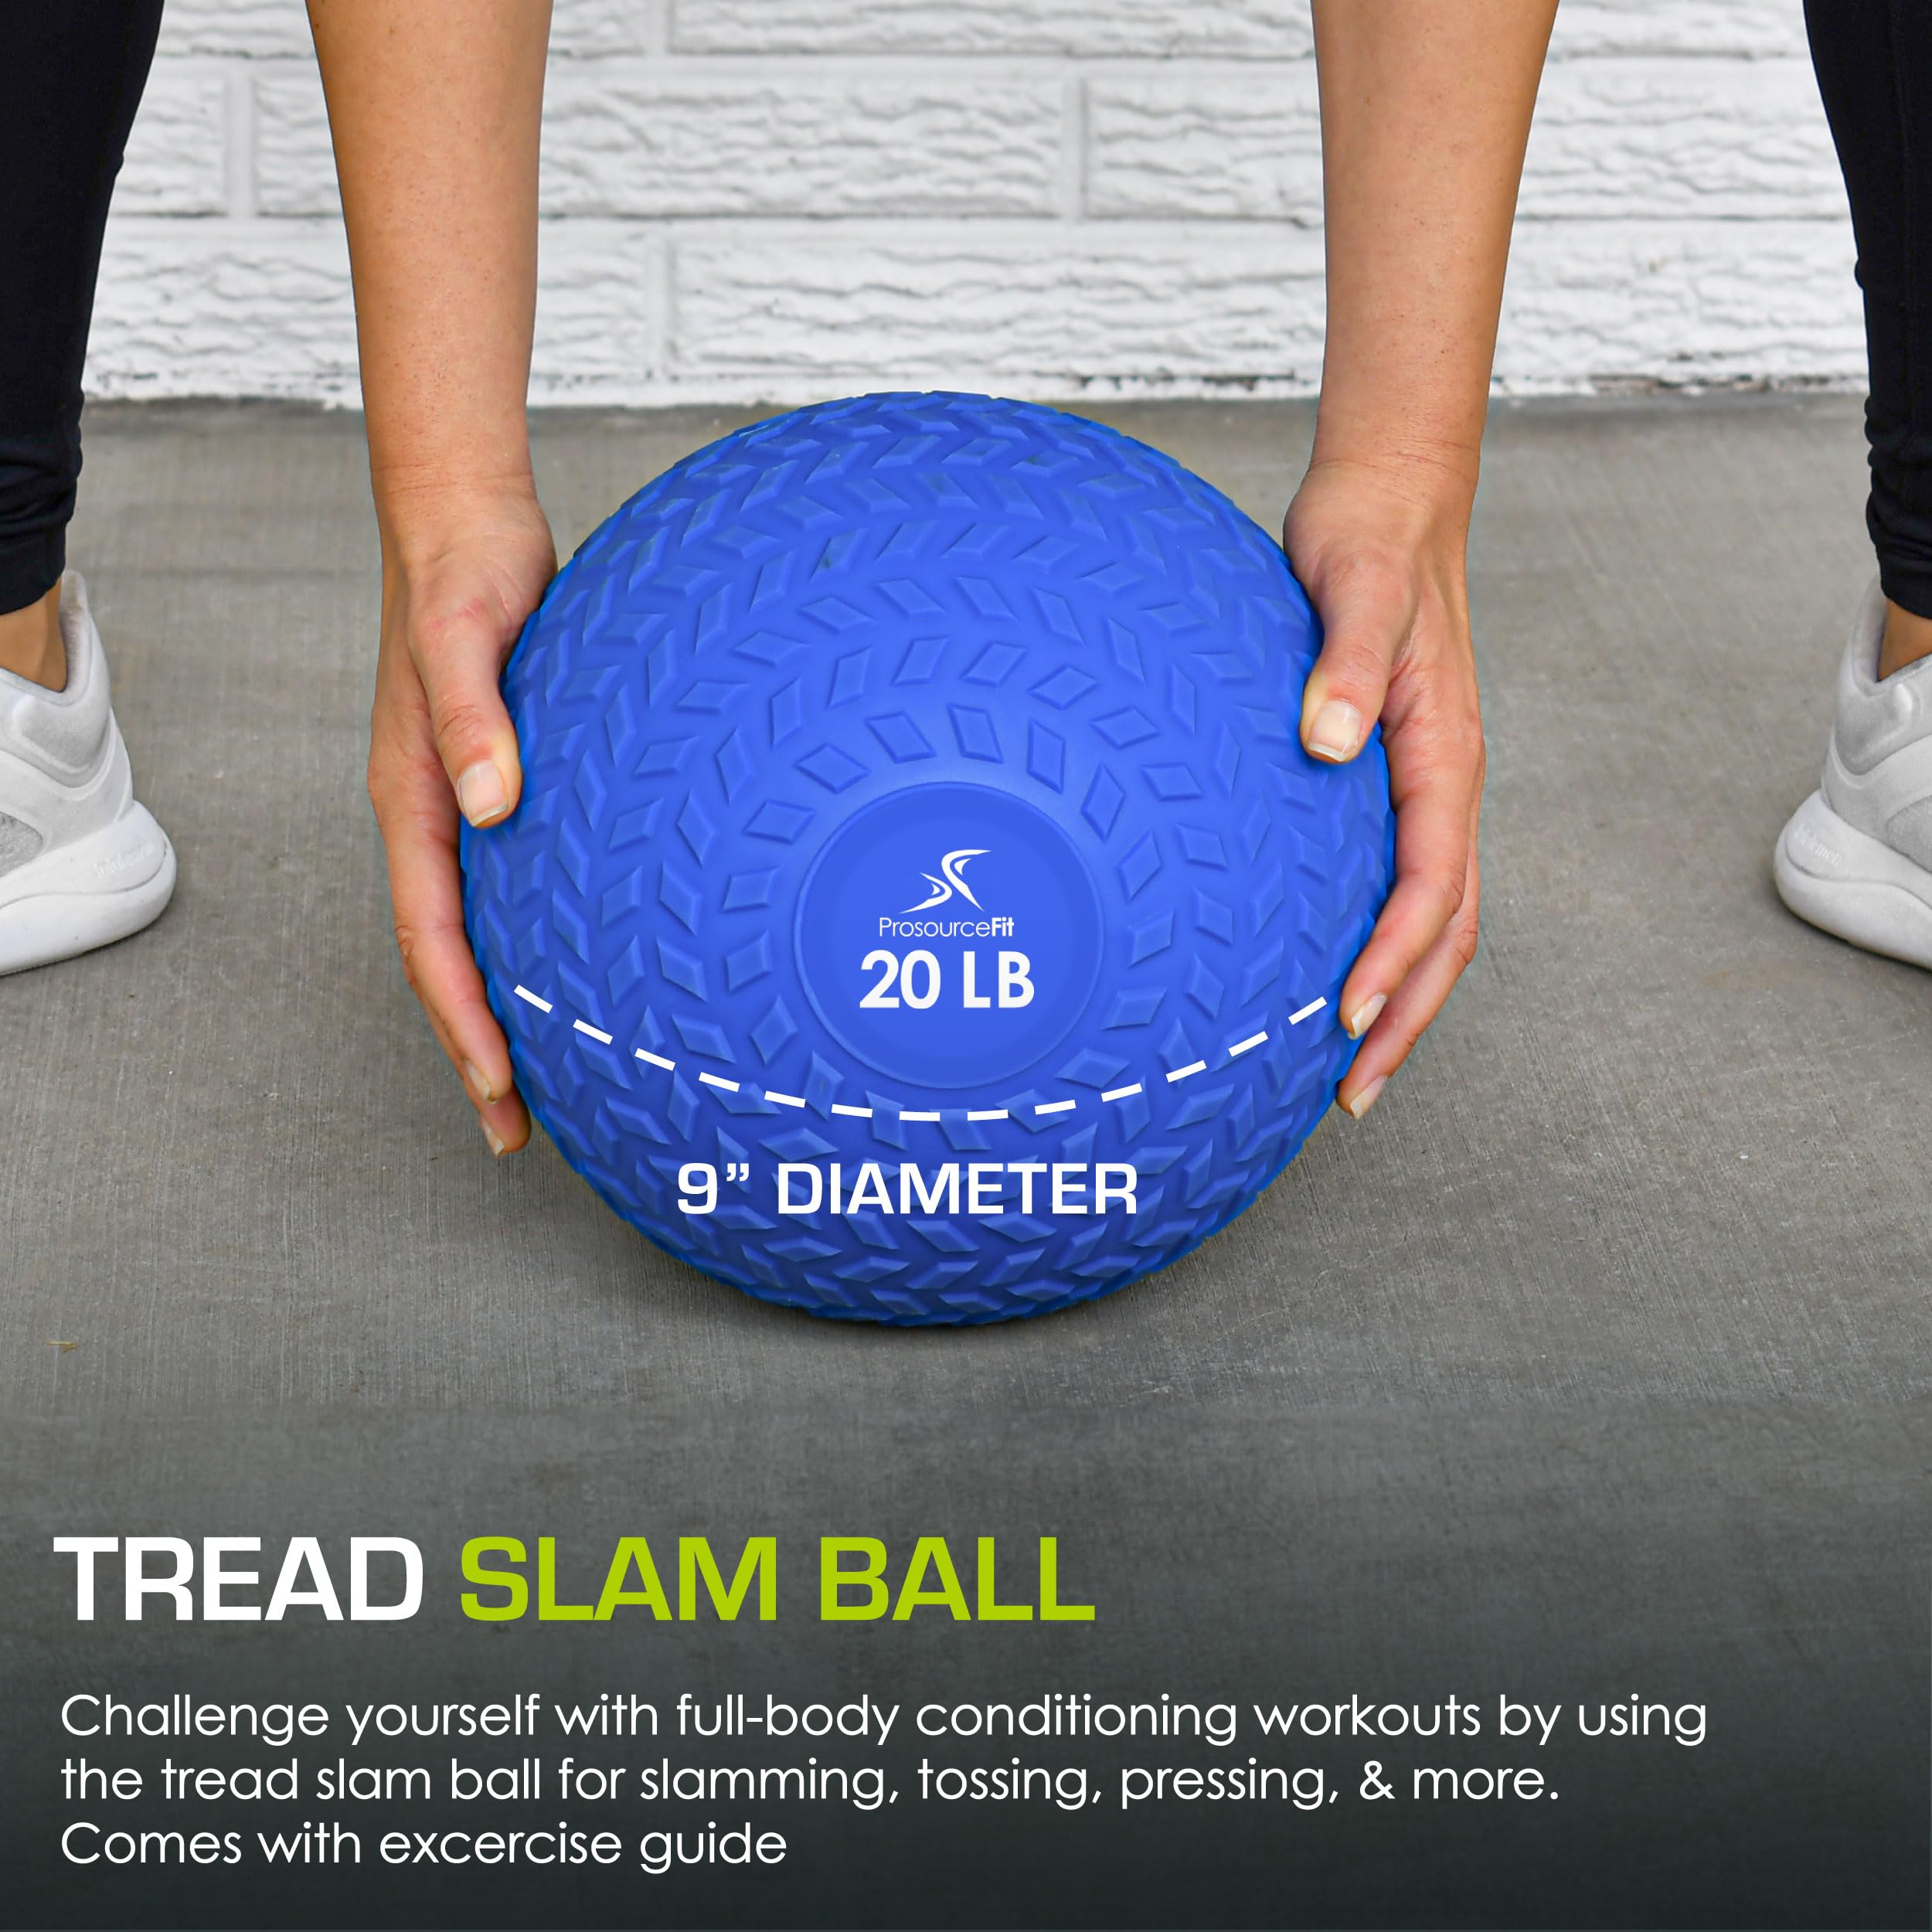 ProsourceFit Slam Medicine Balls, Smooth and Tread Textured Grip Dead Weight Balls for Crossfit, Strength and Conditioning Exerc